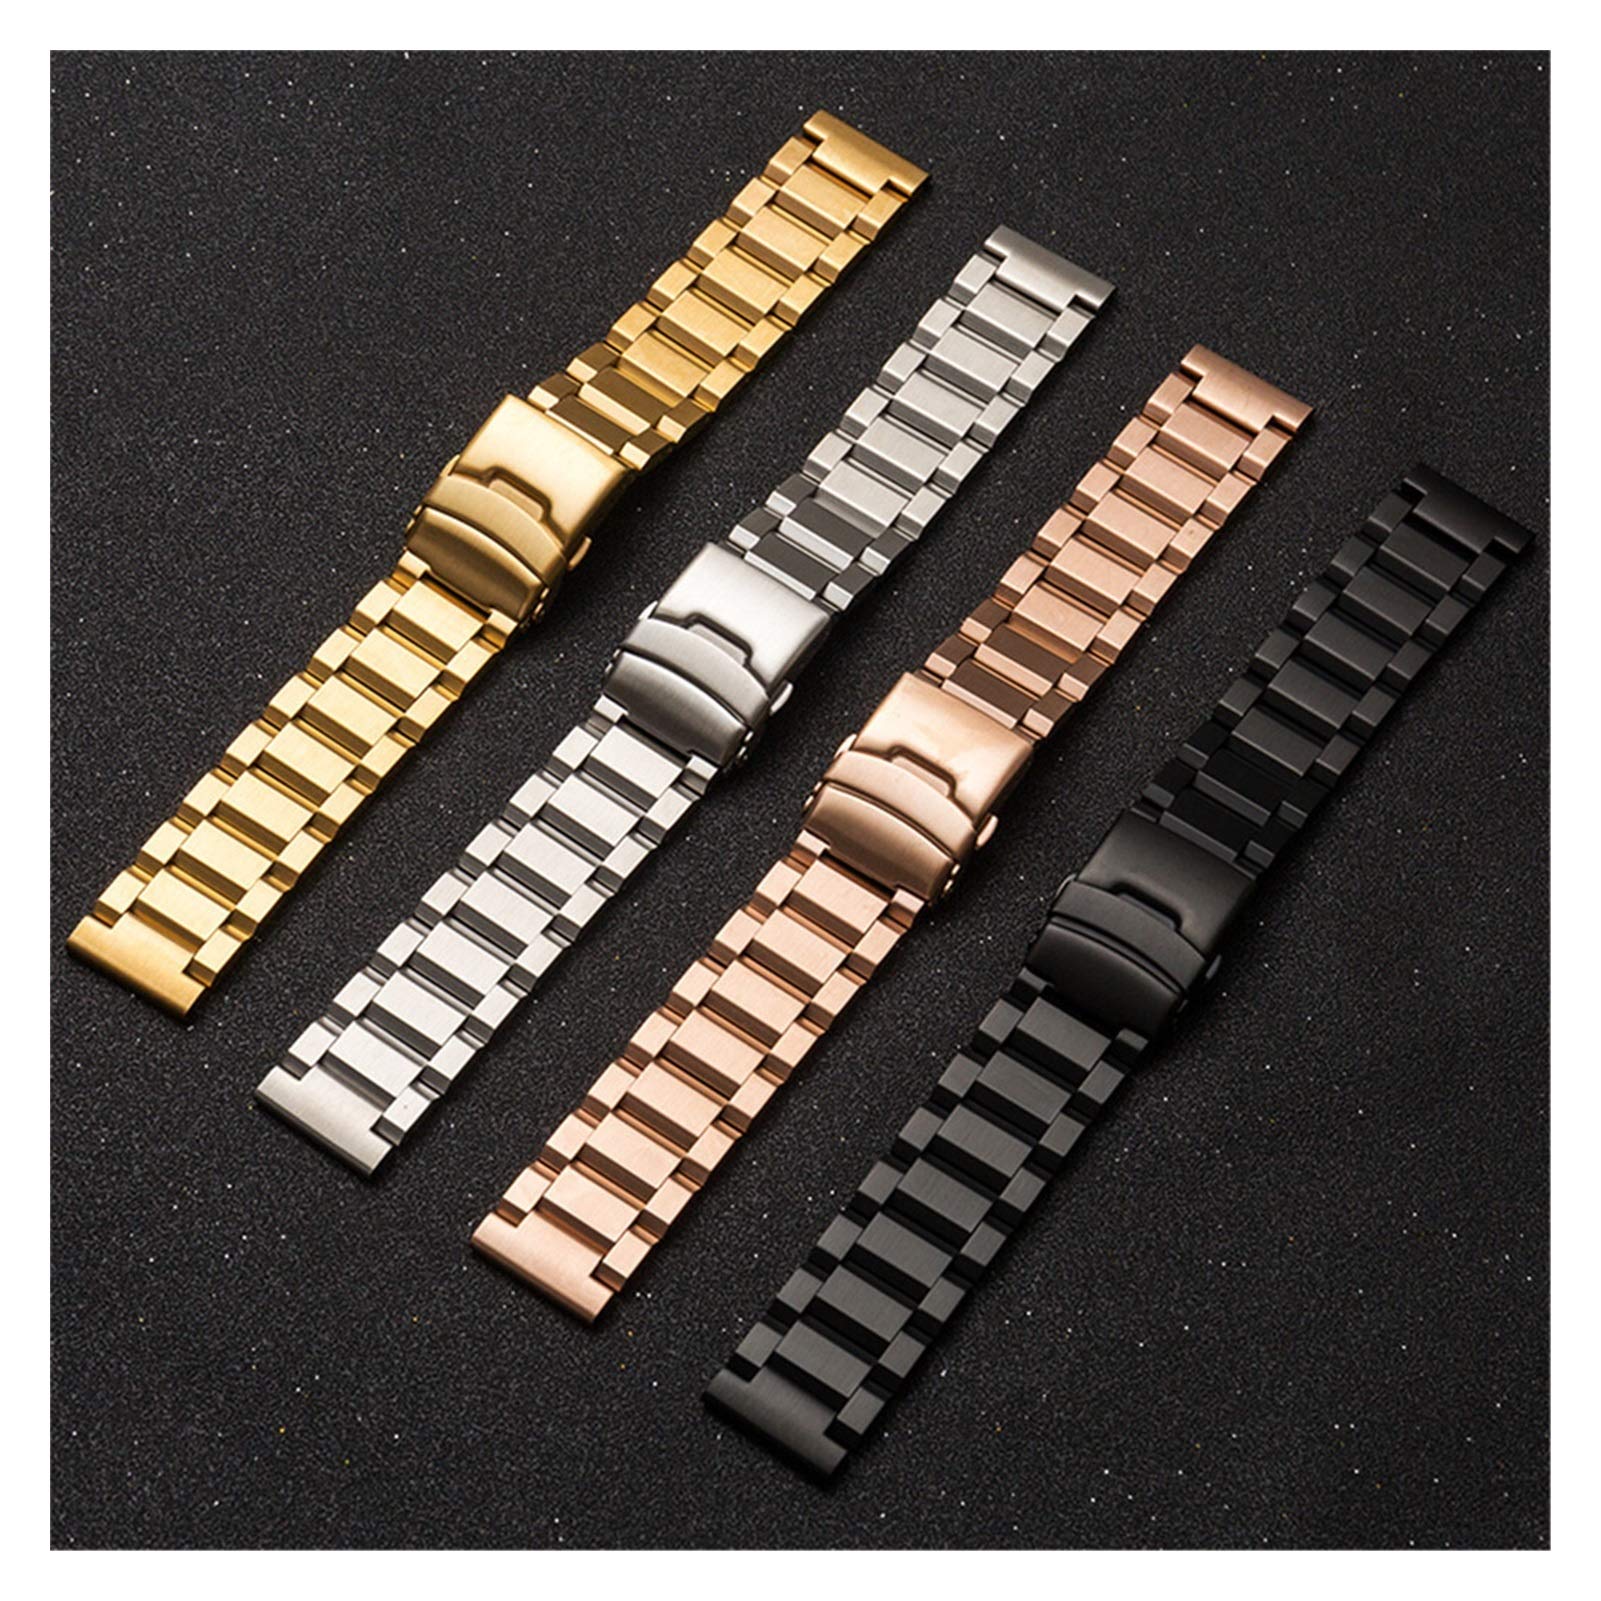 HNGM Men's Watchbands 18mm 19mm 20mm 21mm 22mm 23mm 24mm 25mm Stainless Steel Watchband Solid Metal Men Women Strap Bracelet Watch Band Accessories (Band Color : Rose Gold, Band Width : 22mm)